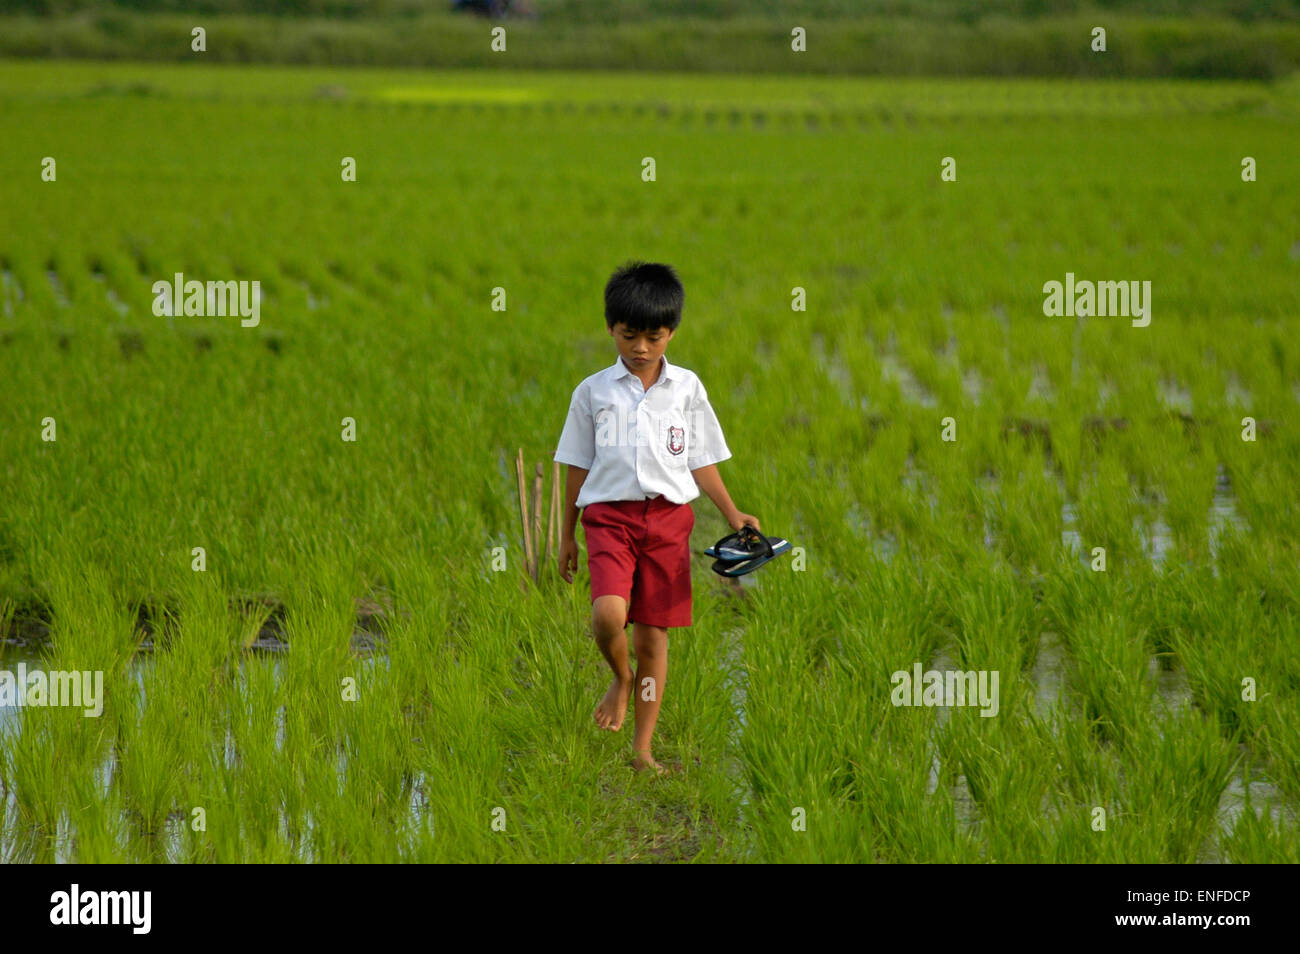 A child wearing elementary school uniform is carrying his sandals as he is walking through rice fields in Gede Bage, West Java, Indonesia. Stock Photo